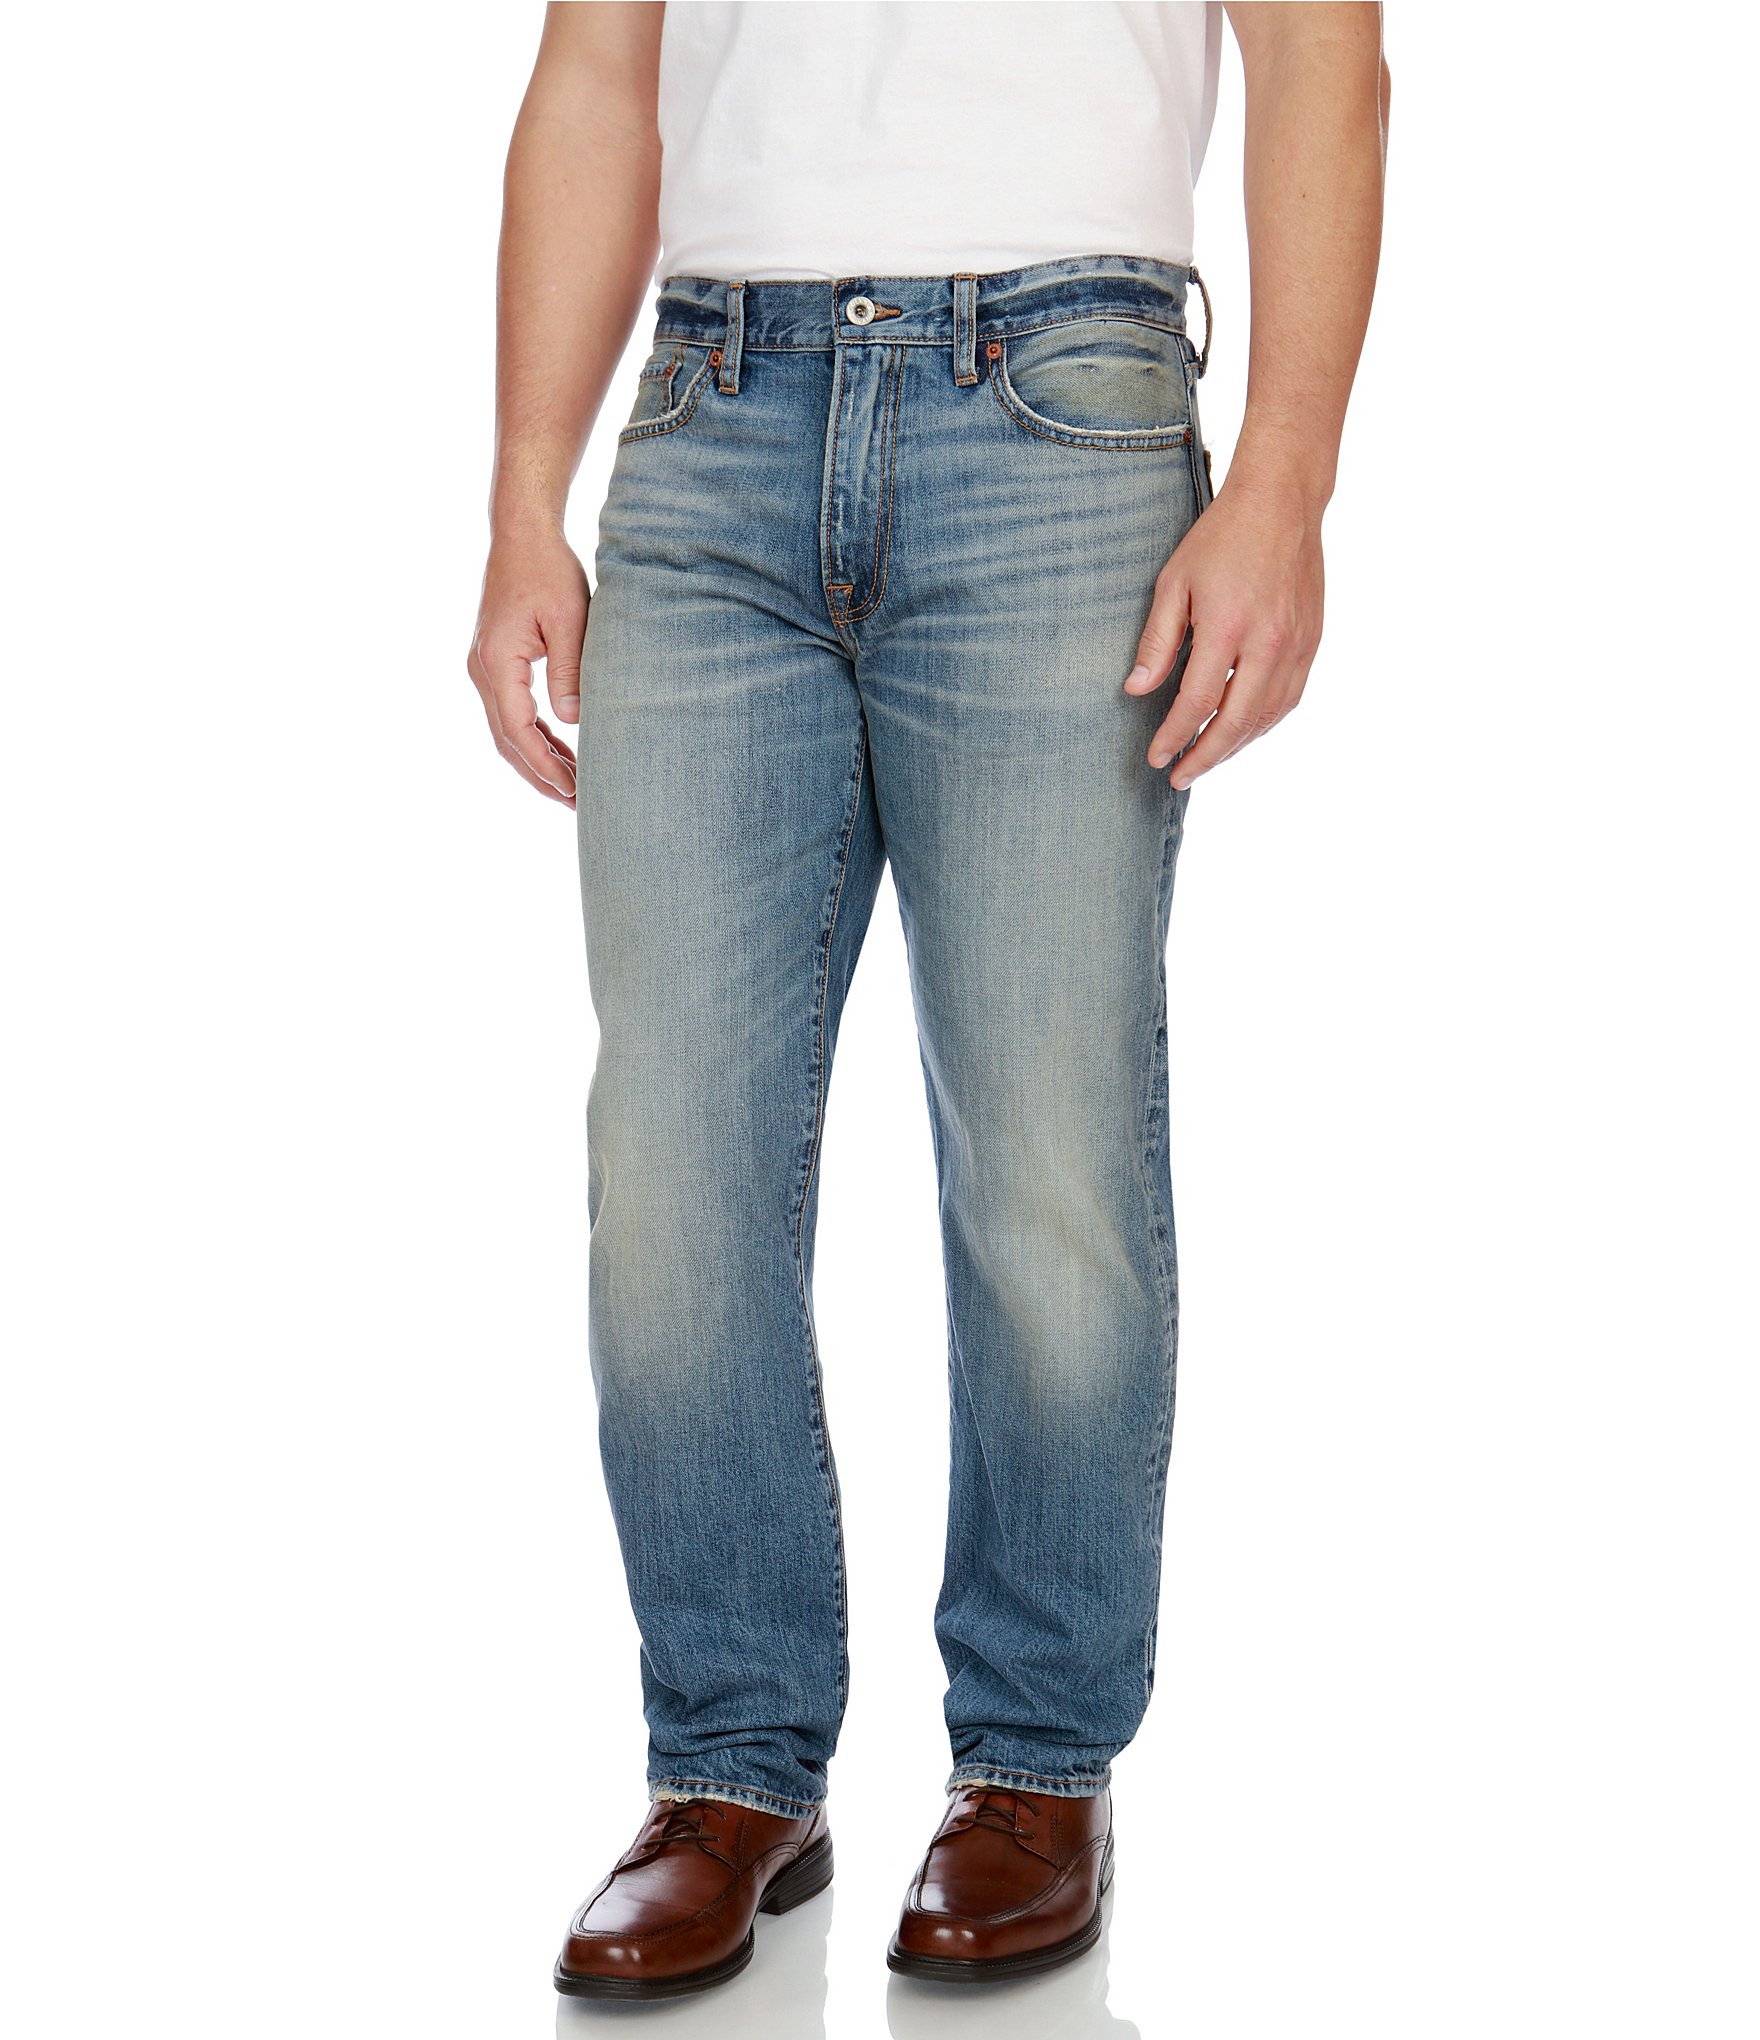 the lucky brand jeans